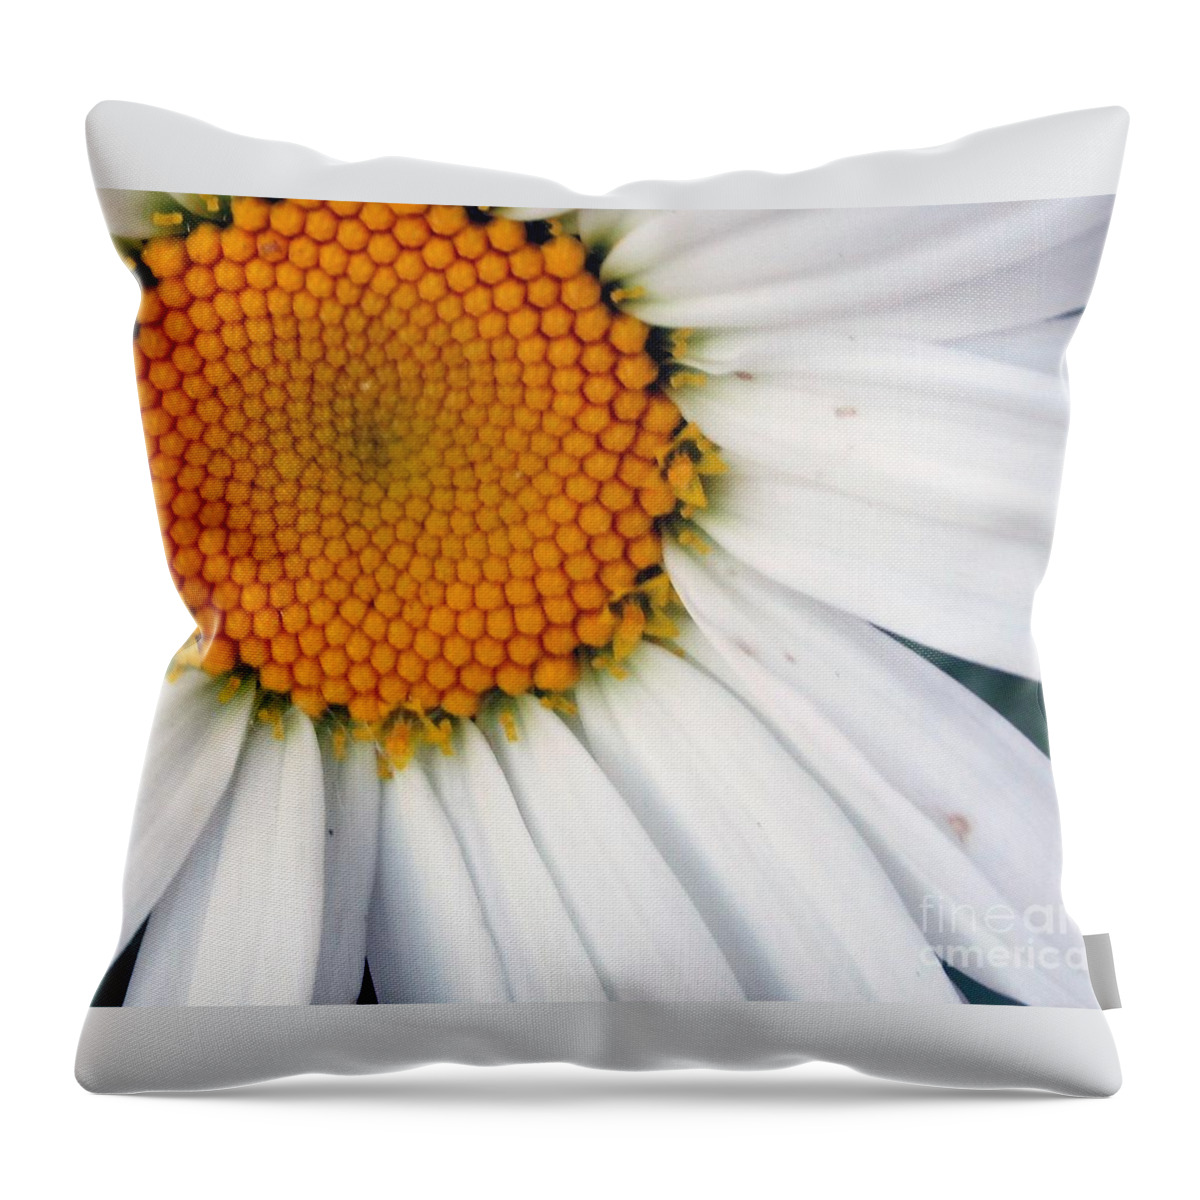 Daisy Throw Pillow featuring the photograph Daisy by Lynellen Nielsen